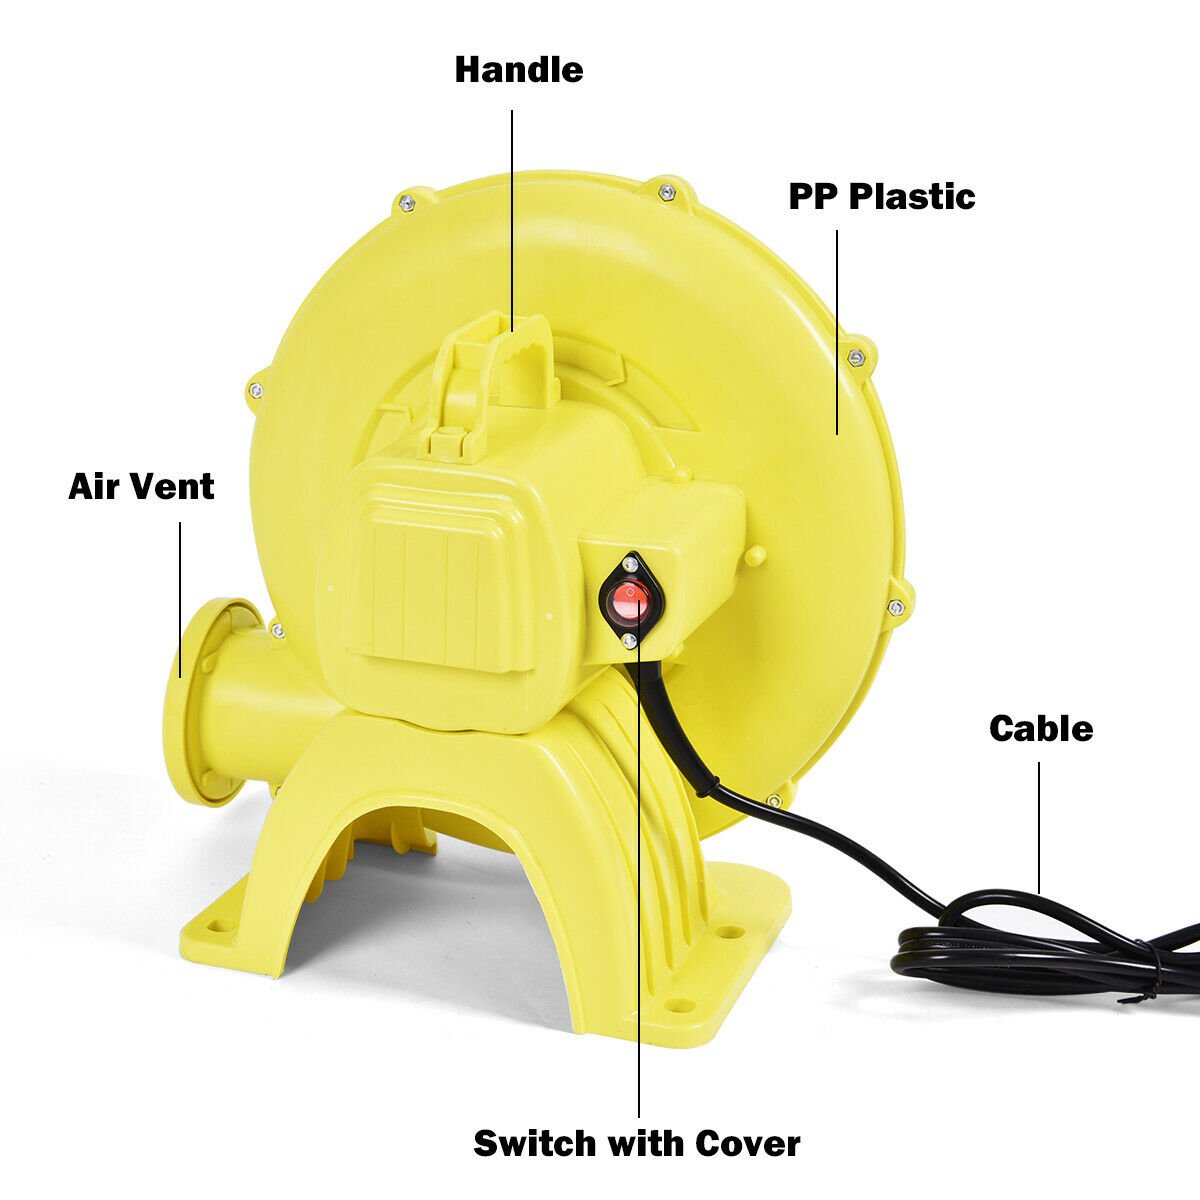 480 W 0.6 HP Air Blower Pump Fan for Inflatable Bounce House, Yellow